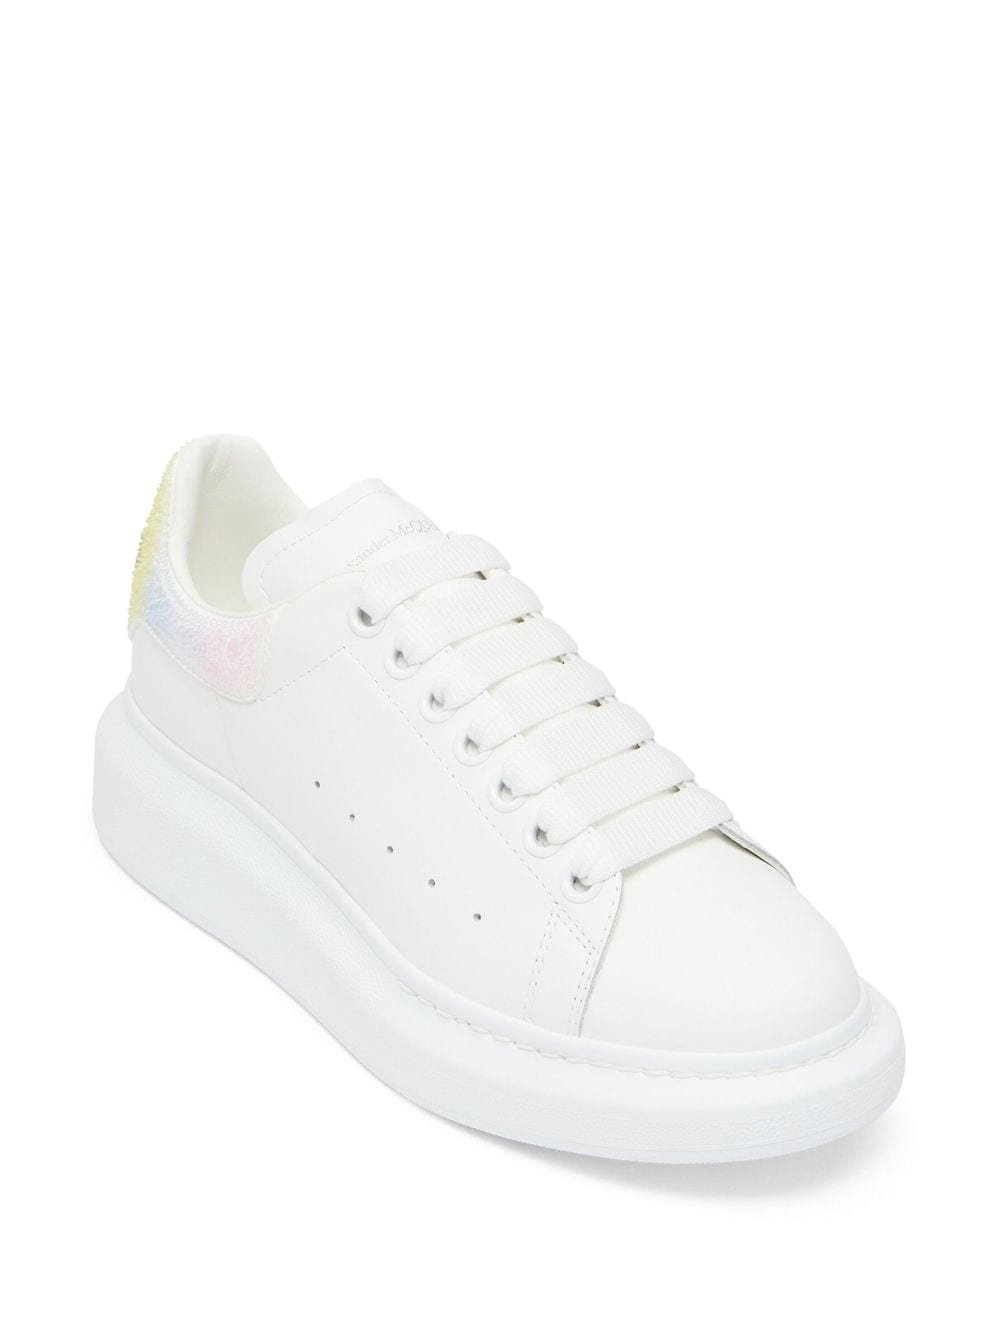 Image 2 of Alexander McQueen crystal-embellished leather sneakers